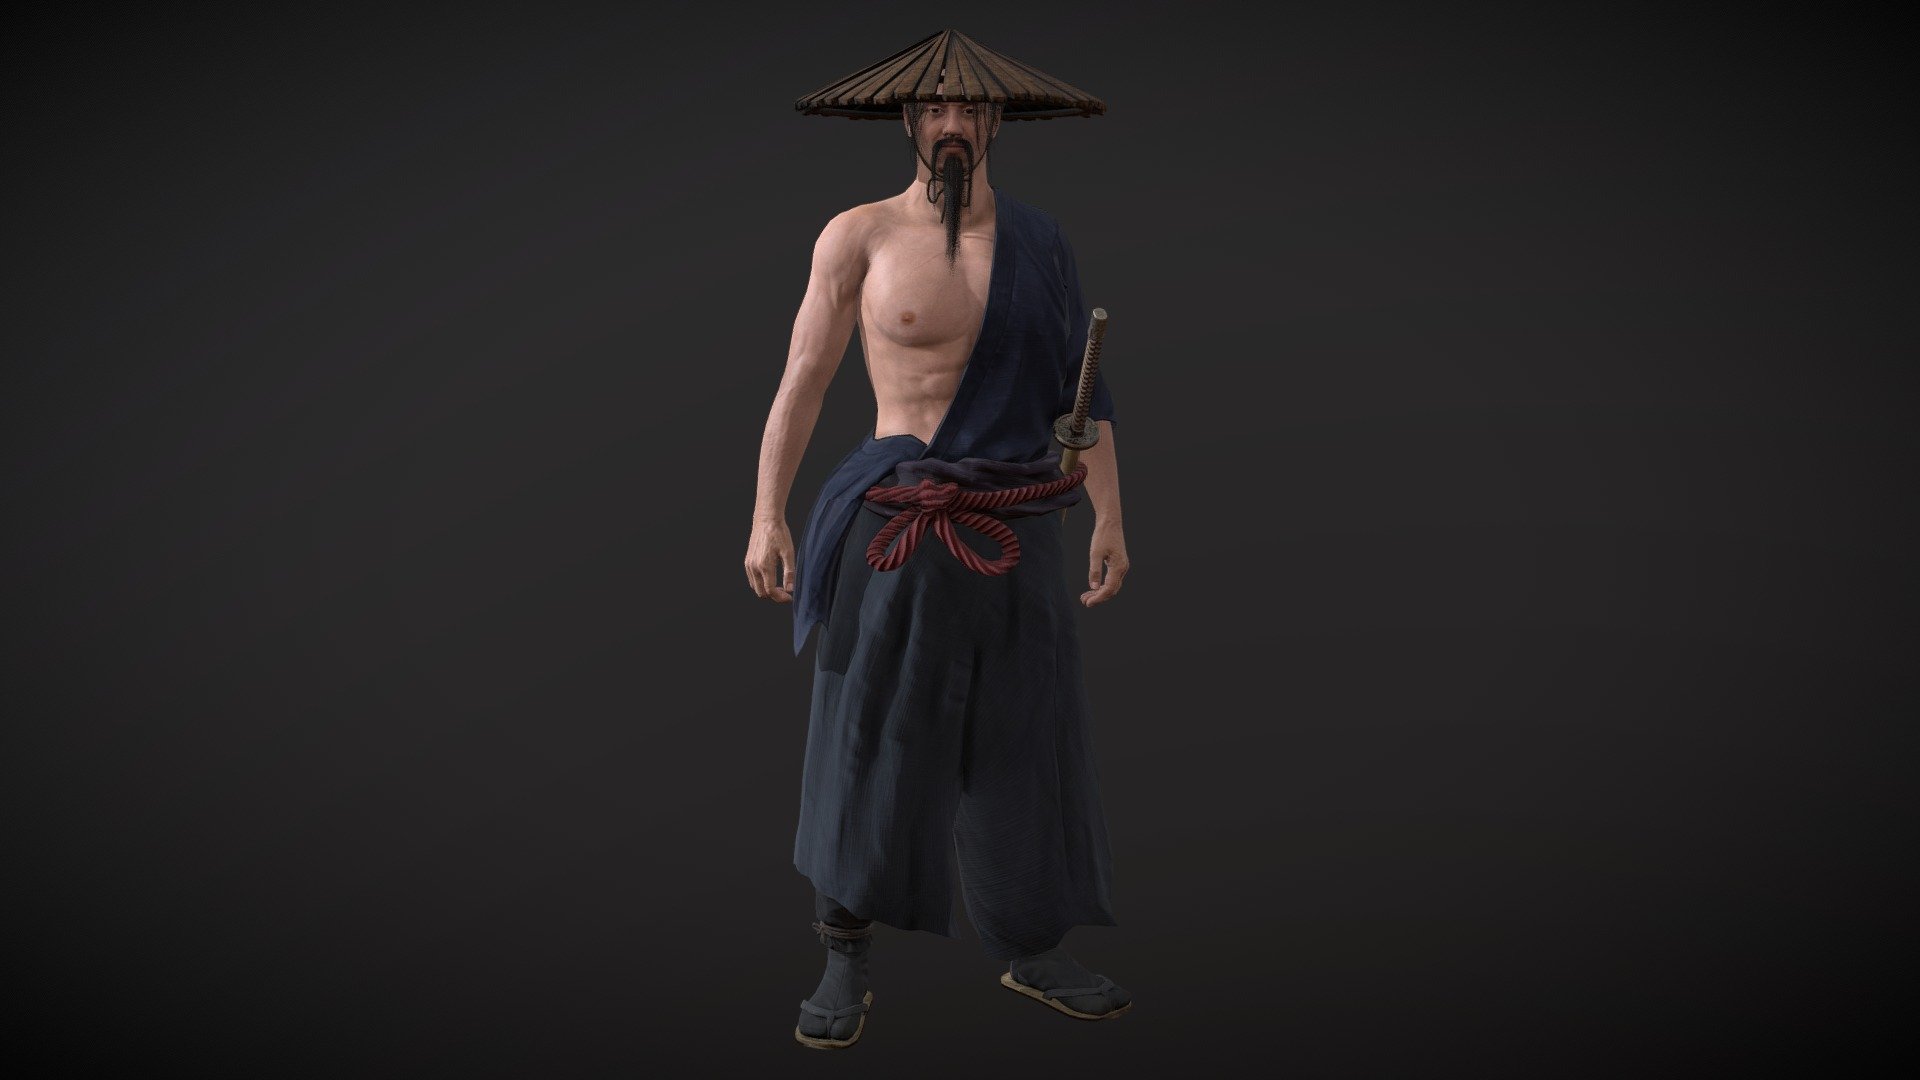 Samurai:
Complete archive in additional file.

Character in A-pose ( Game Version).




High details.

Highres unique textures.

Rigged.

Exported to Unreal ( migrate files). Use same standard unreal mannequin skeleton. Can handle the same animations as Unreal mannequin from marketplace.

Highres Texturesets.

Professional Uv Layout.

Character mesh.

3d Game Ready Samurai Warrior Character.

High detail and realistic model.

Rigged, with high definition textures.

Texture types:




Albedo (Diffuse).

Normal.

Roughness.

Metallness.

ORM(Unreal Engine).
 - Samurai Character PBR Game Ready - Buy Royalty Free 3D model by lidiom4ri4 3d model